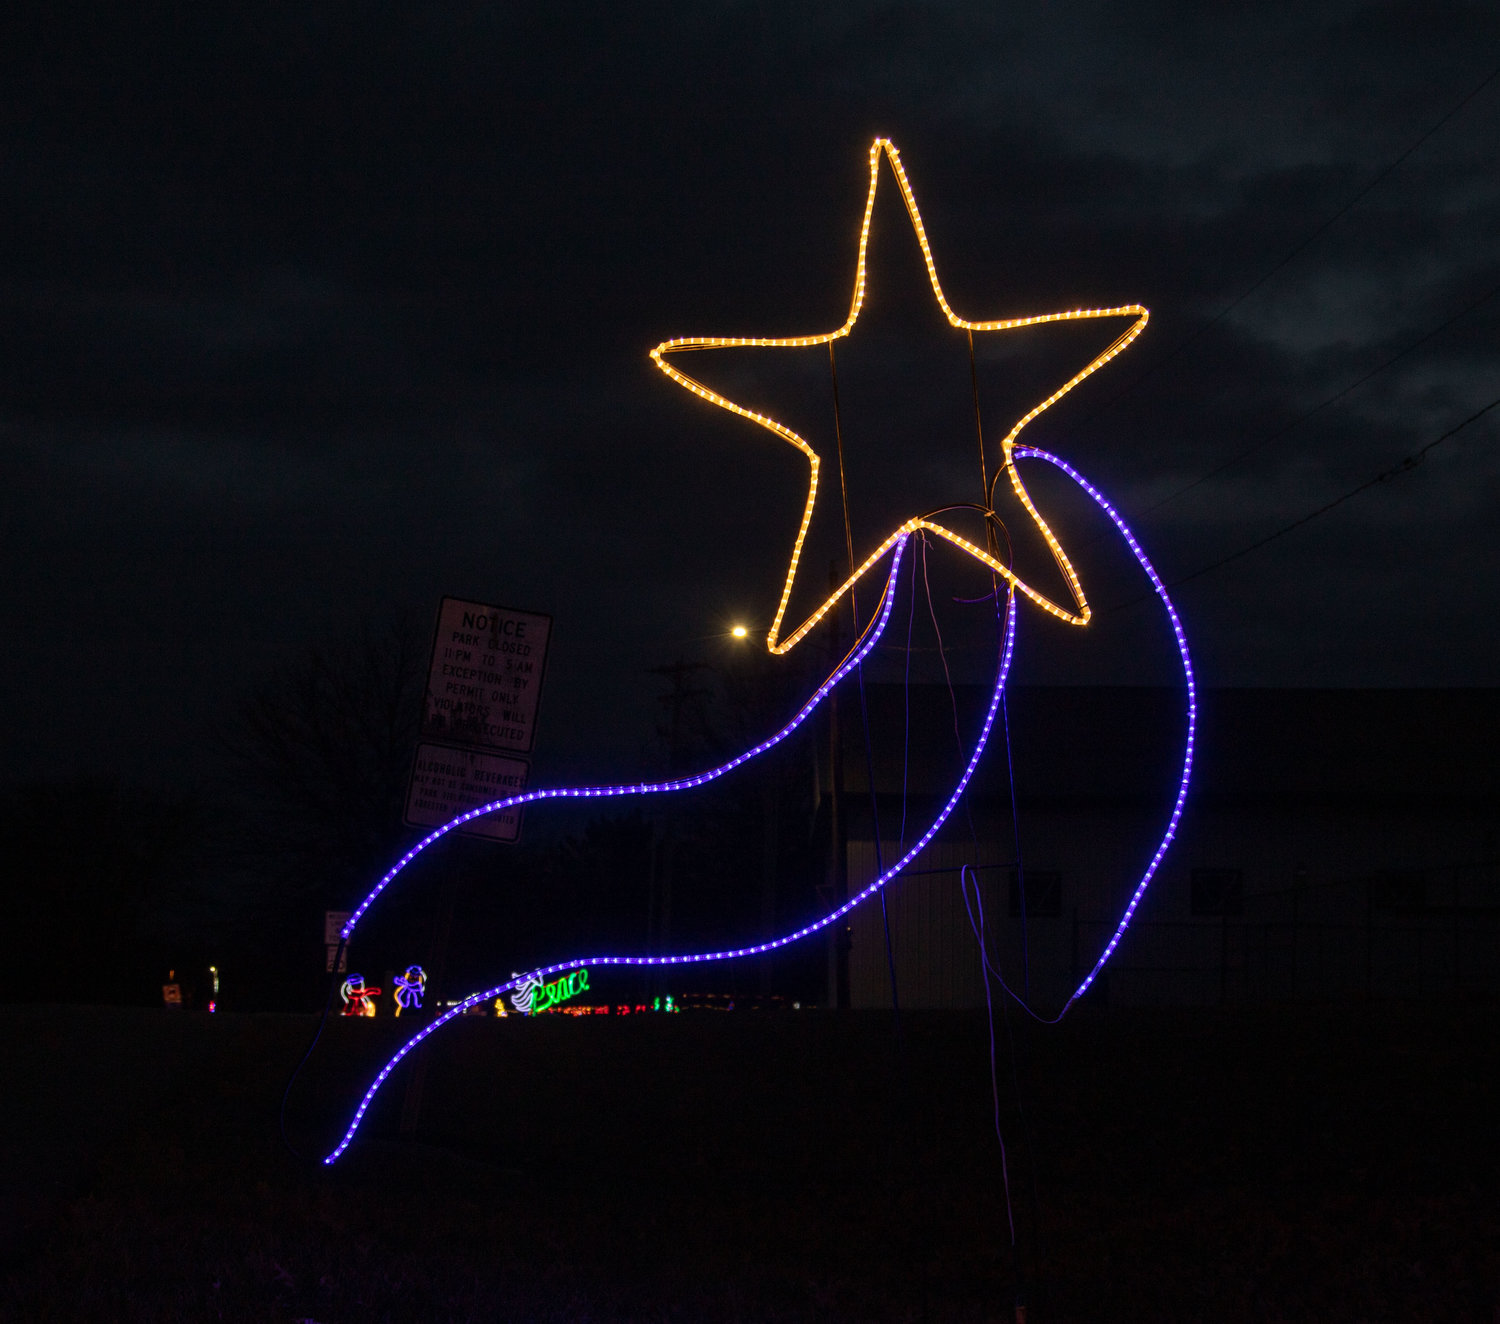 A star guides visitors to the Rothwell Park lodge to begin their drive through Altrusa International’s light display.